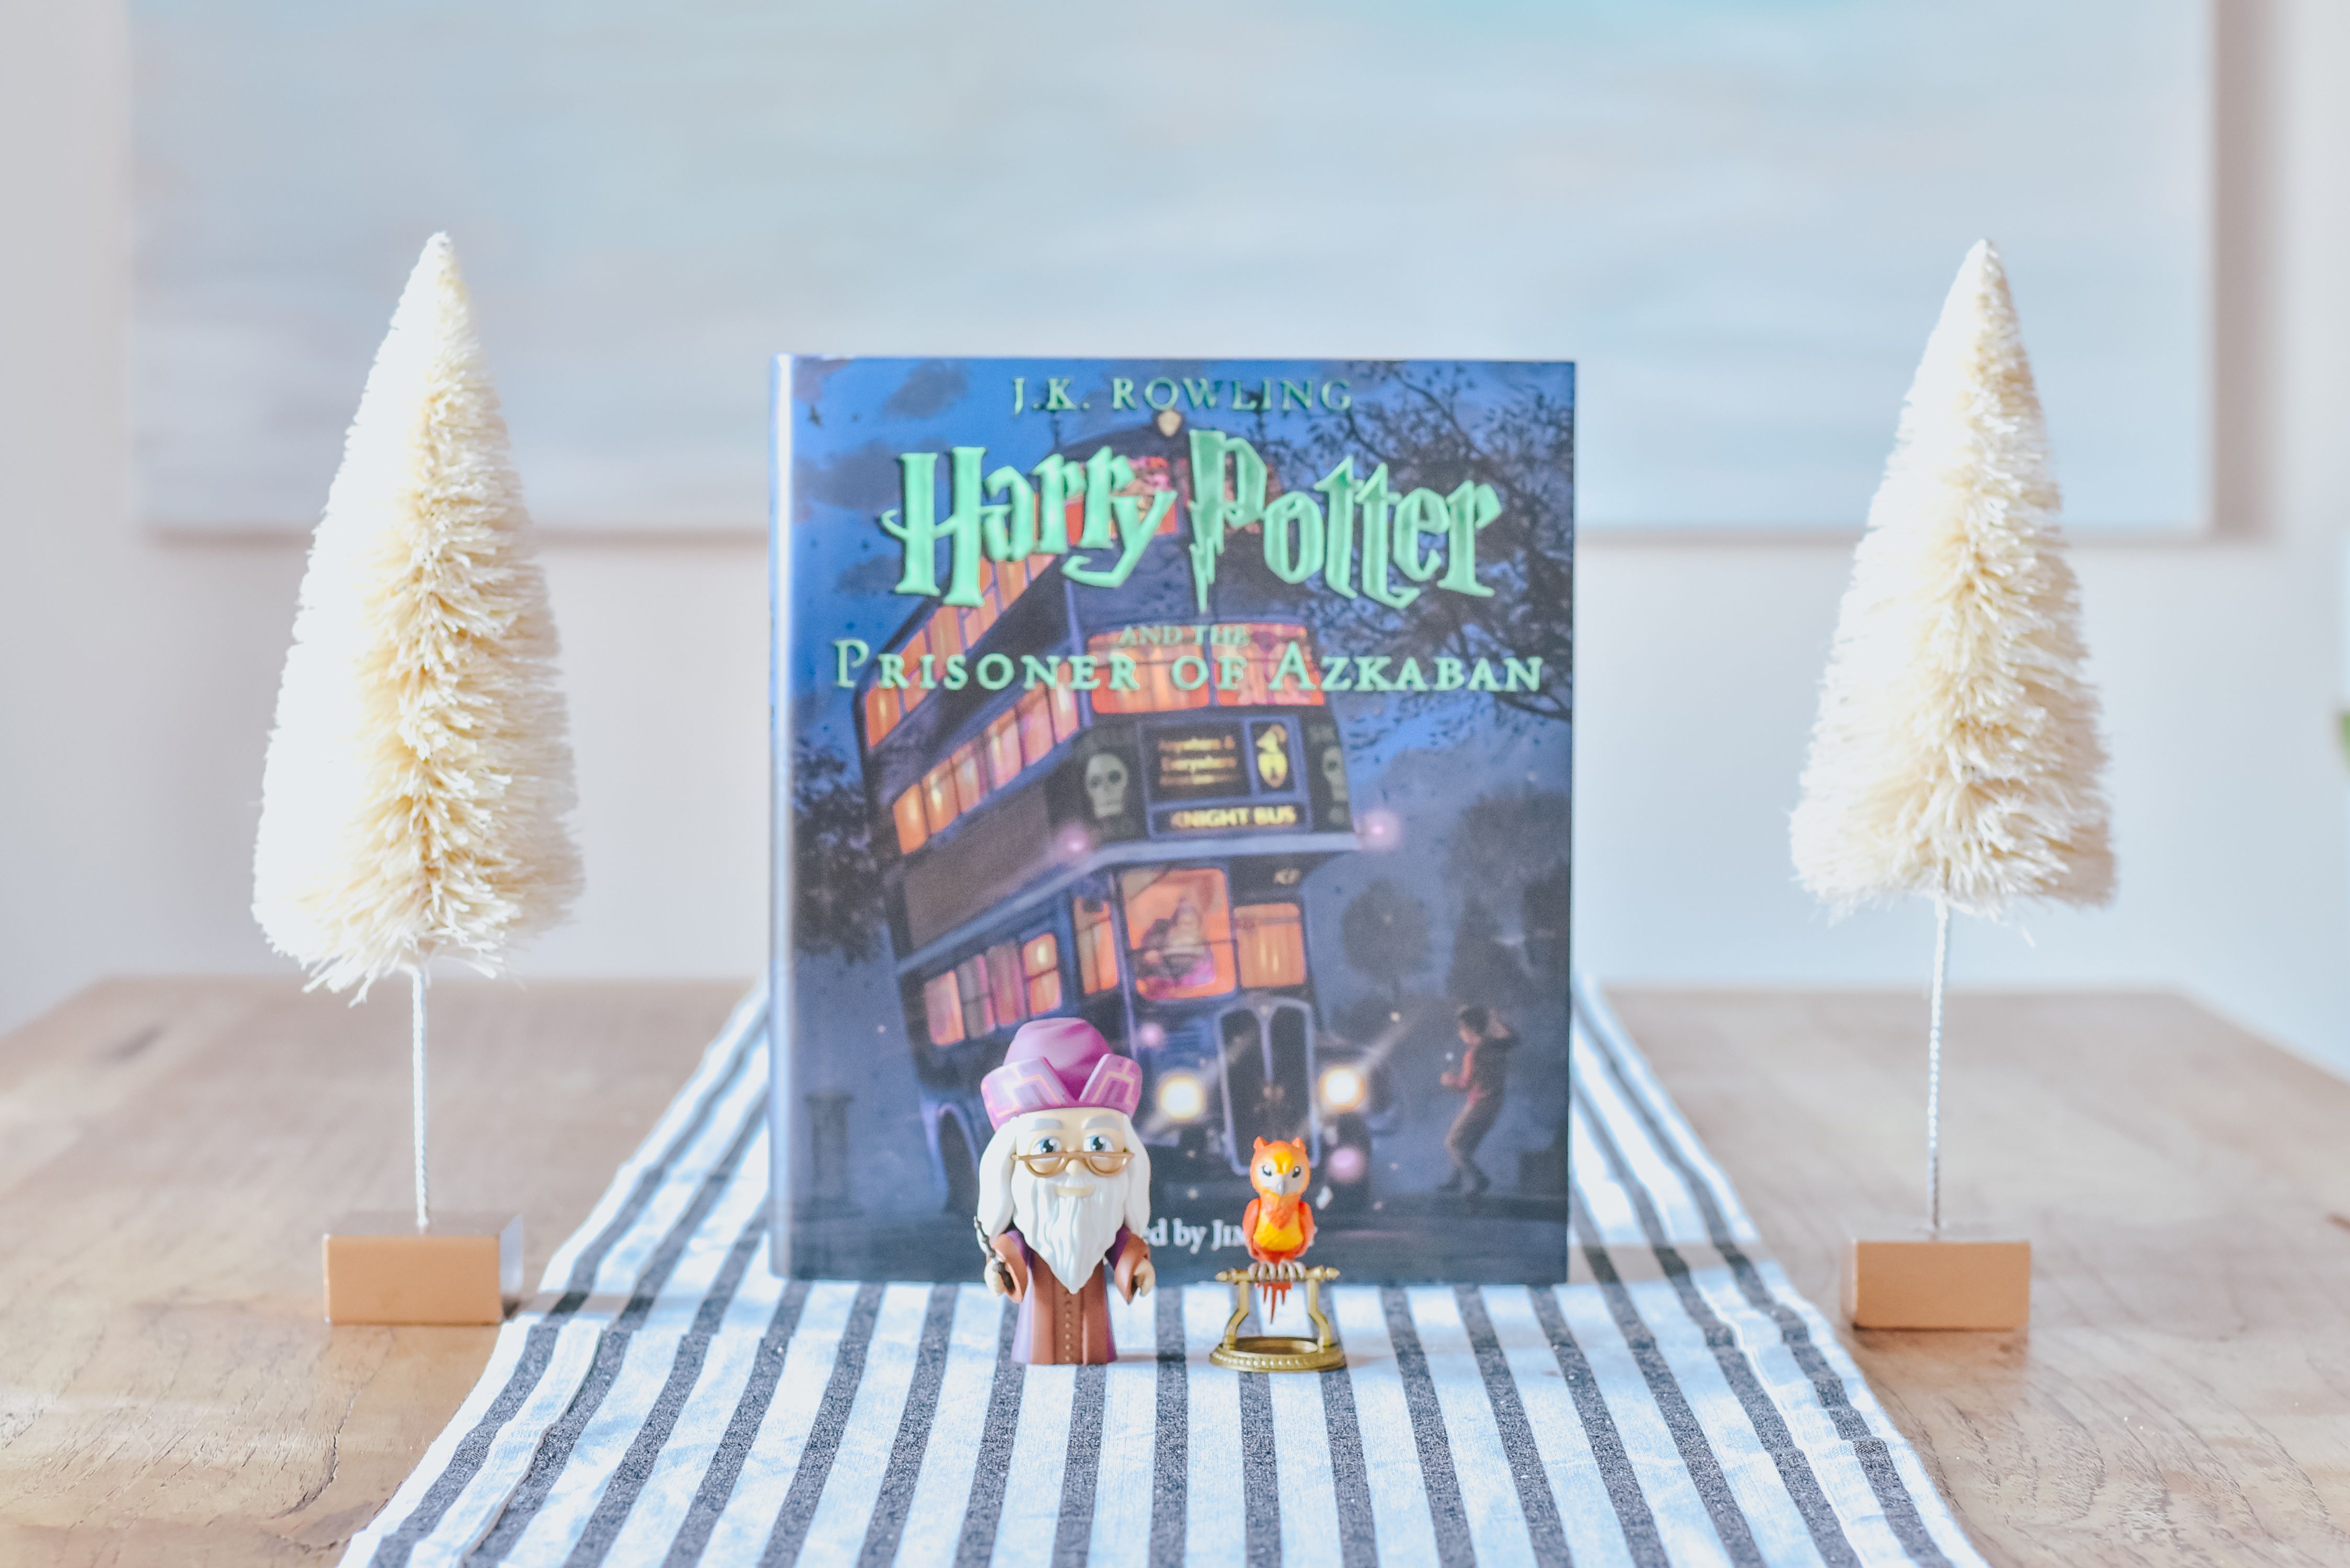 30A Mama Kids Gift Ideas with Babbleboxx Harry Potter and the Prisoner of Azkaban with Dumbledore Figurine